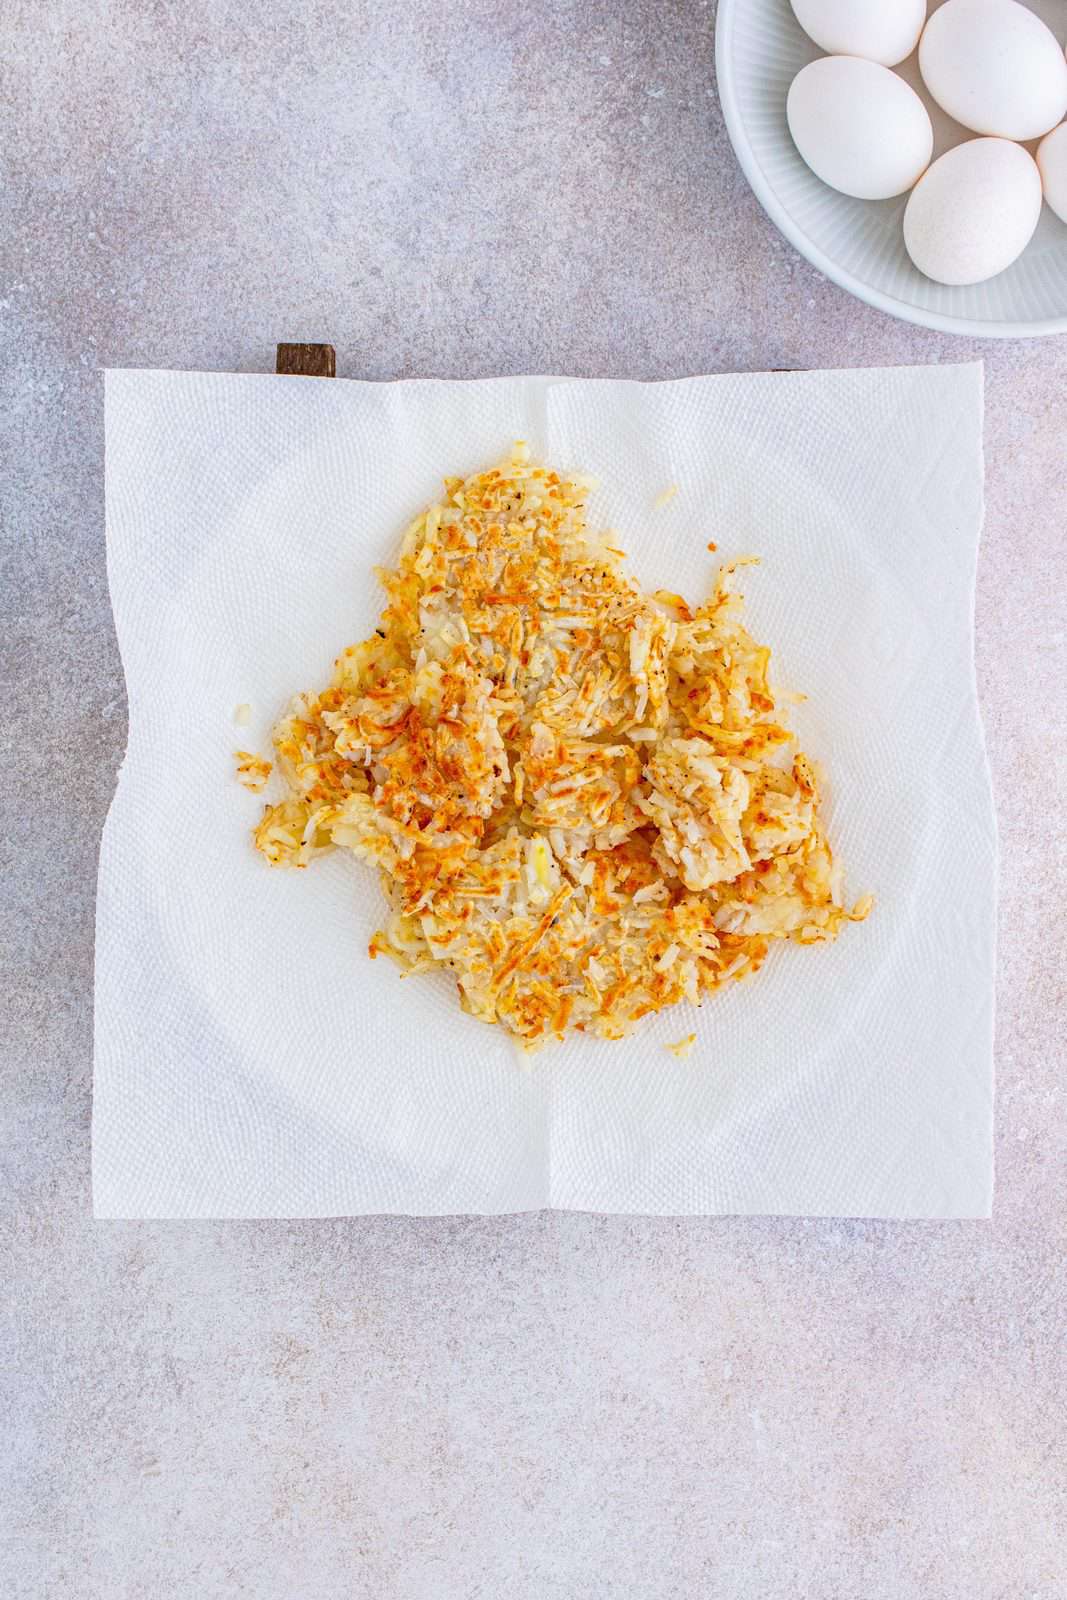 cooked shredded hash browns on a paper towel.